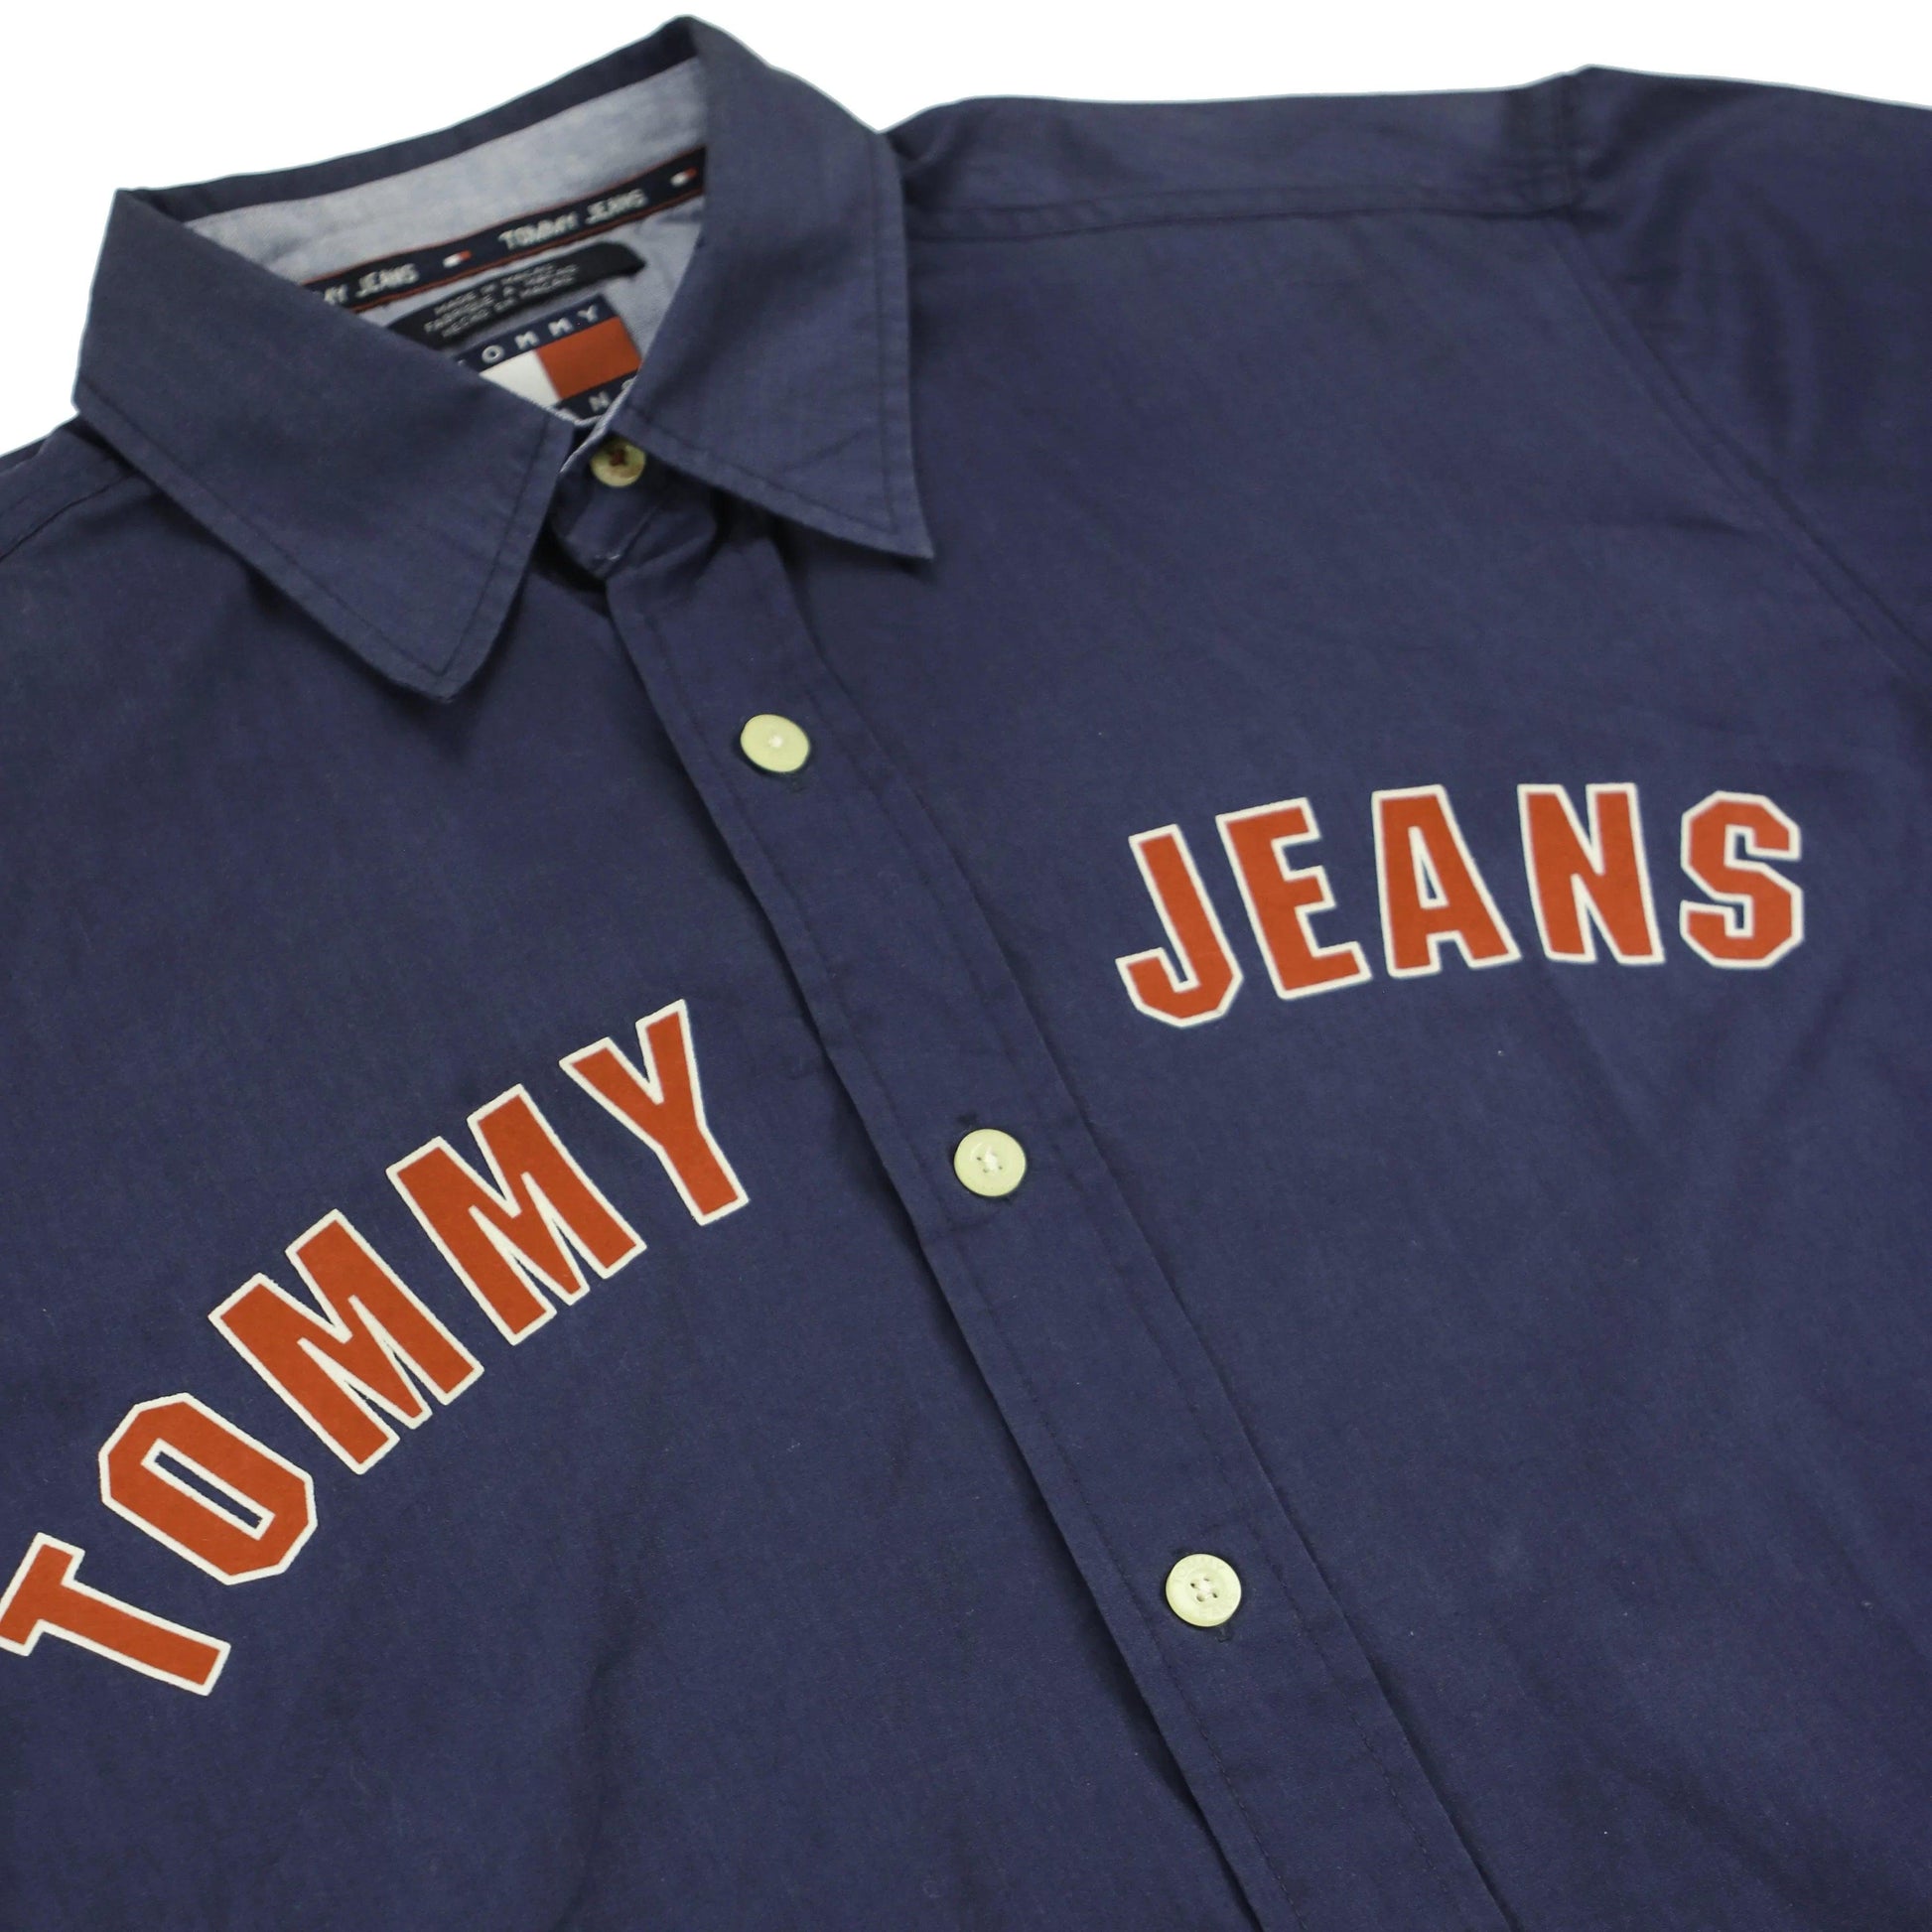 TOMMY JEANS FLAG SHIRT (S) (S) - Known Source